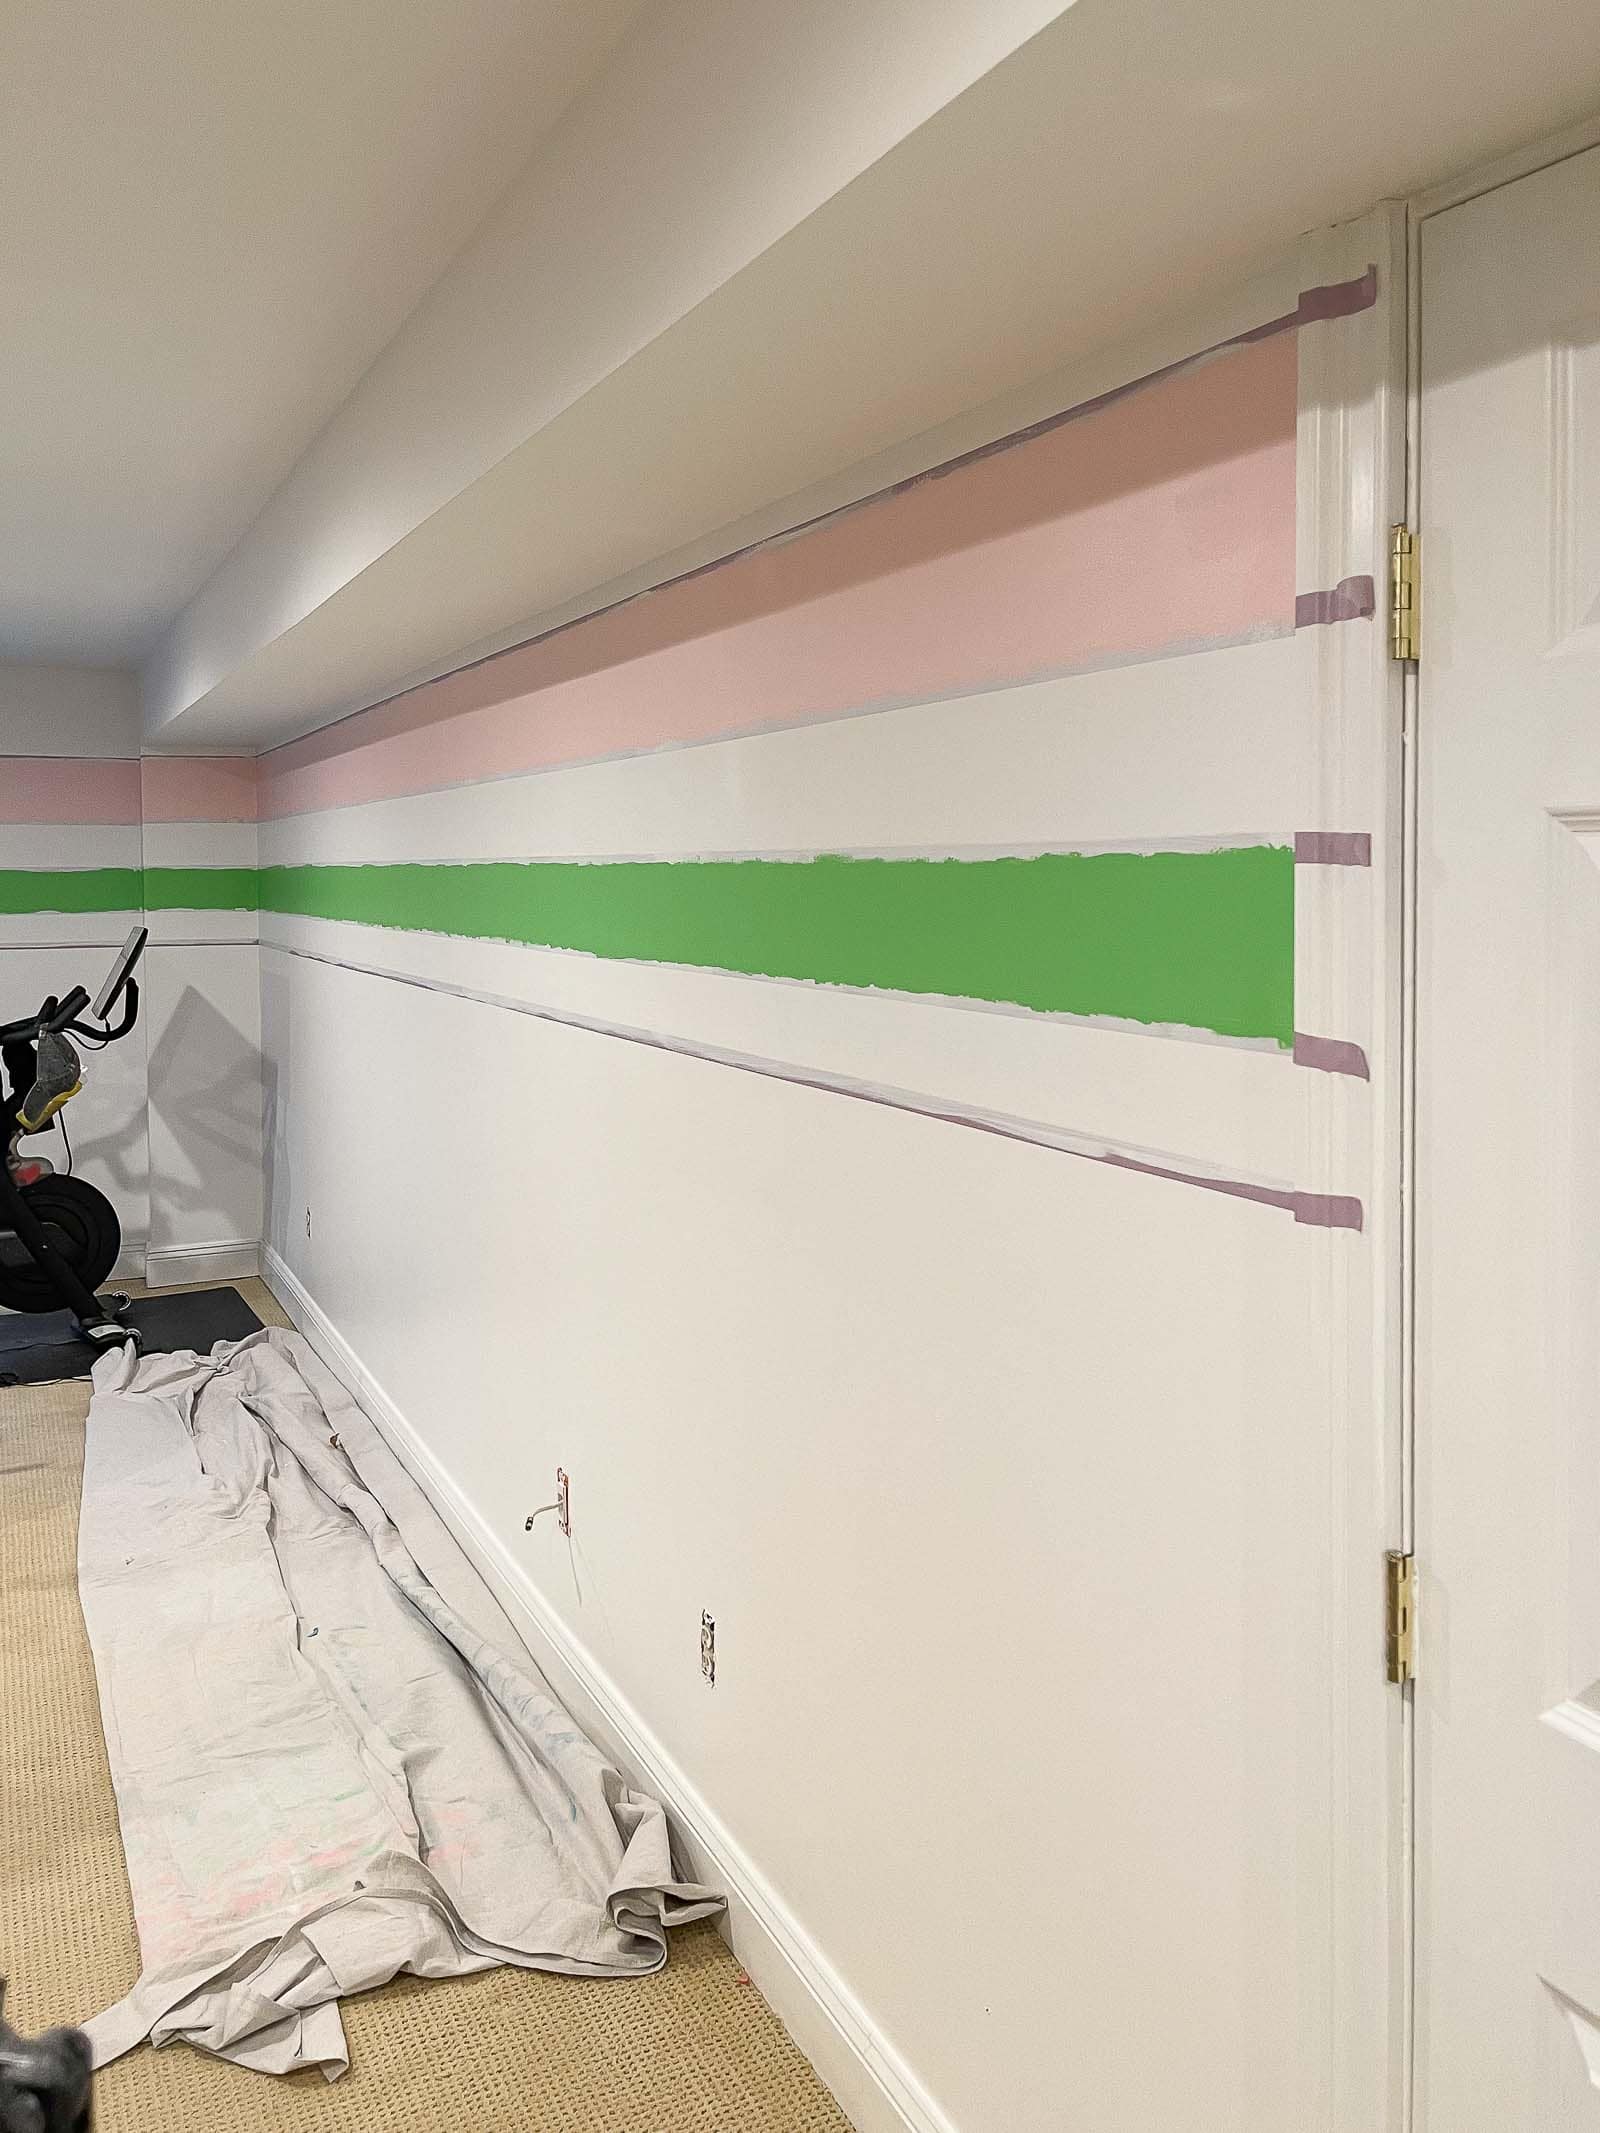 painting stripes on the wall